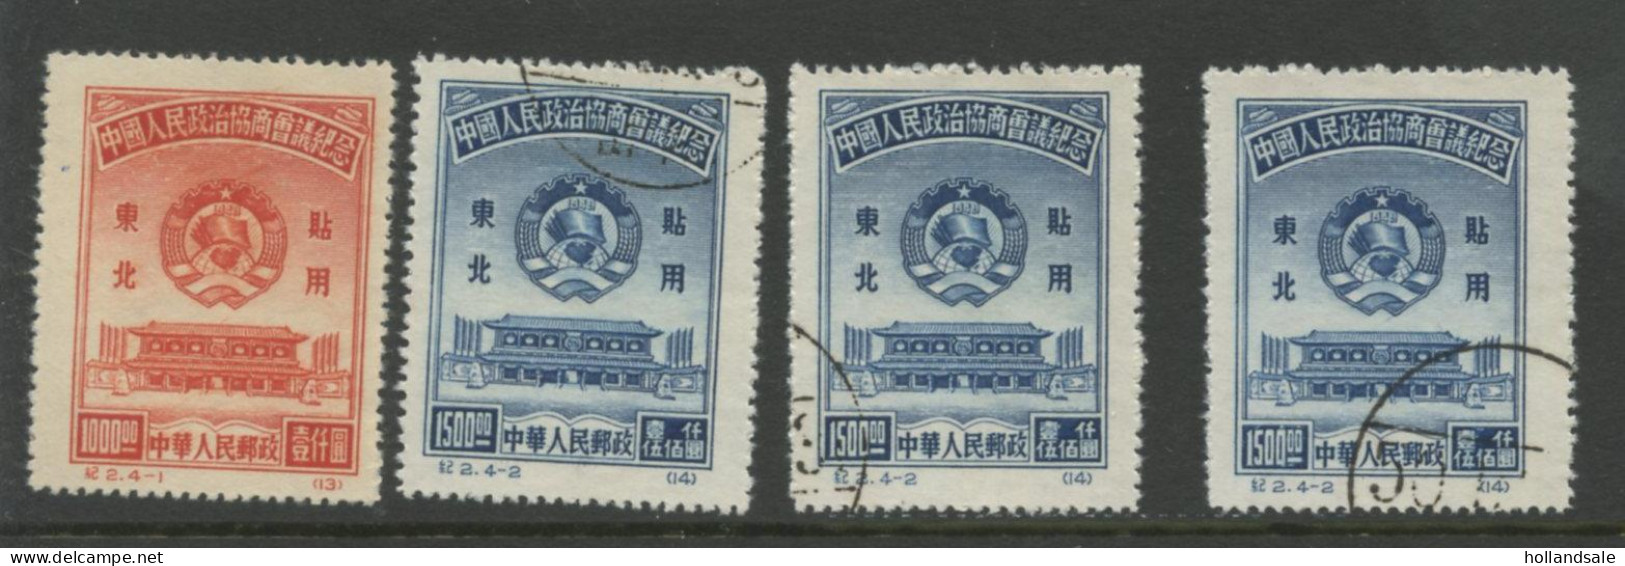 CHINA NORTH-EAST - MICHEL 158 And 159 II (reprints).  158 Unused, Others Used. - Cina Del Nord-Est 1946-48